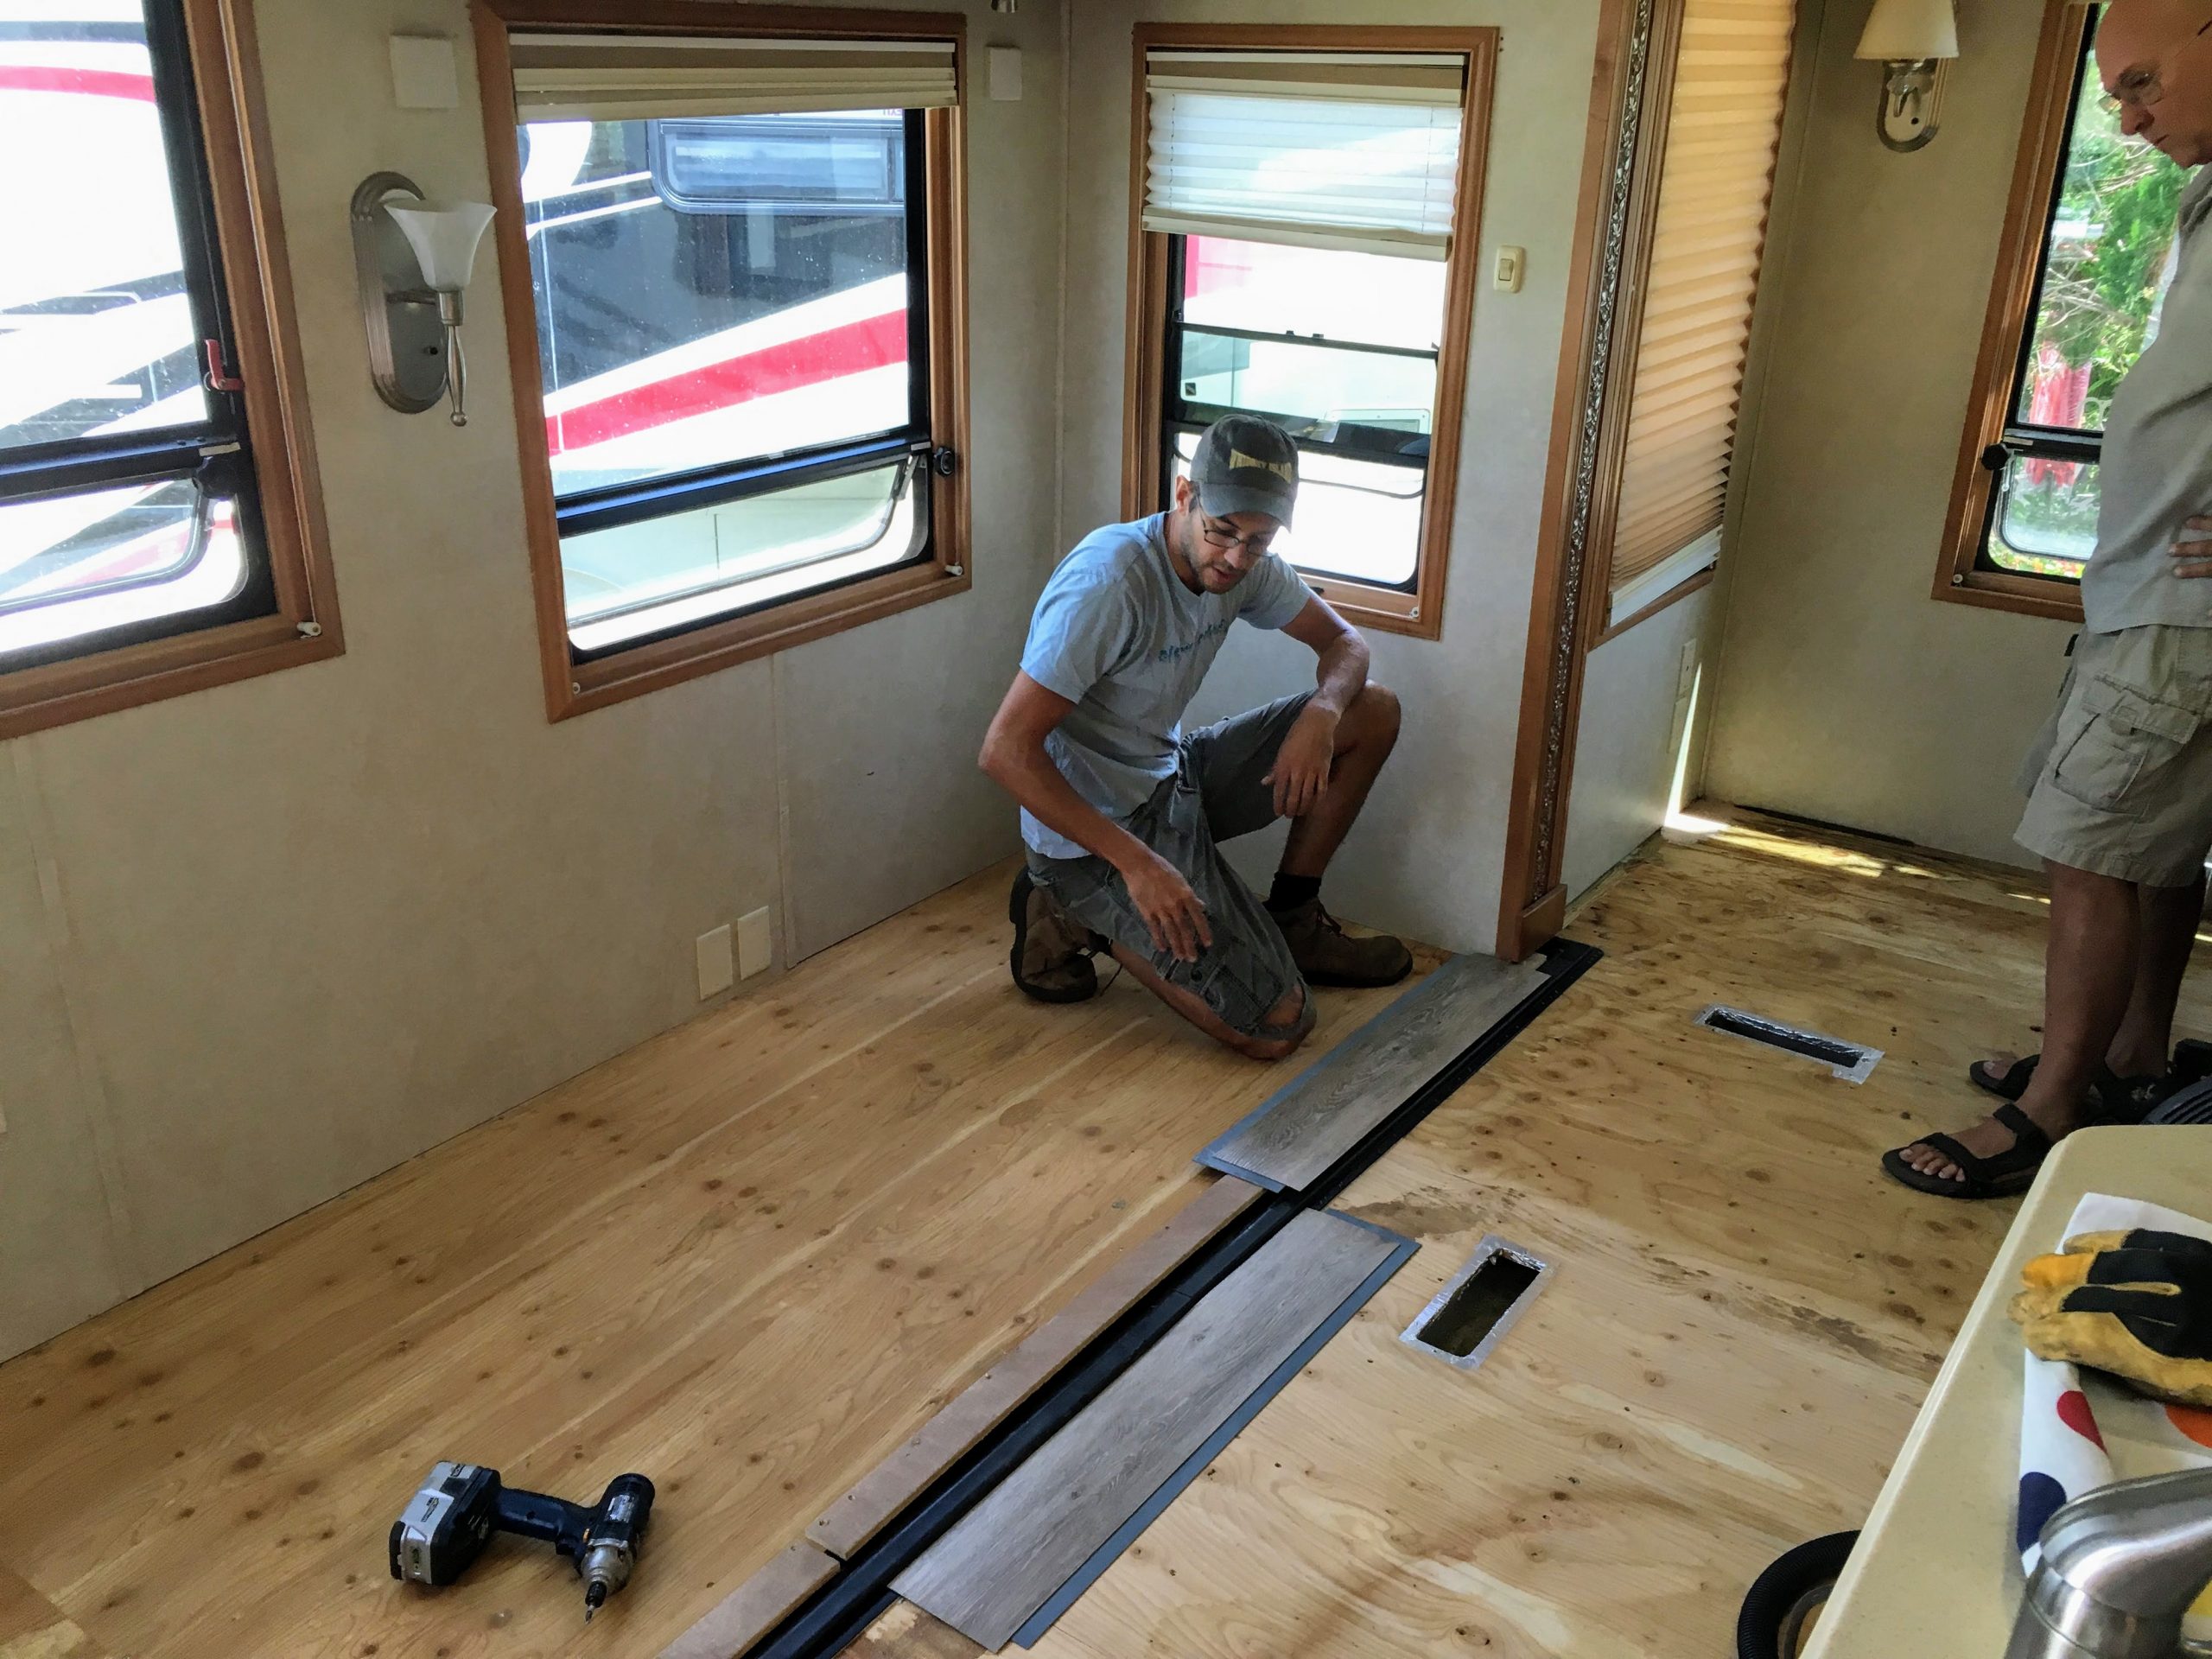 Diy Rv Flooring With A Flush Slideout, How To Install New Flooring In A Motorhome With Slides